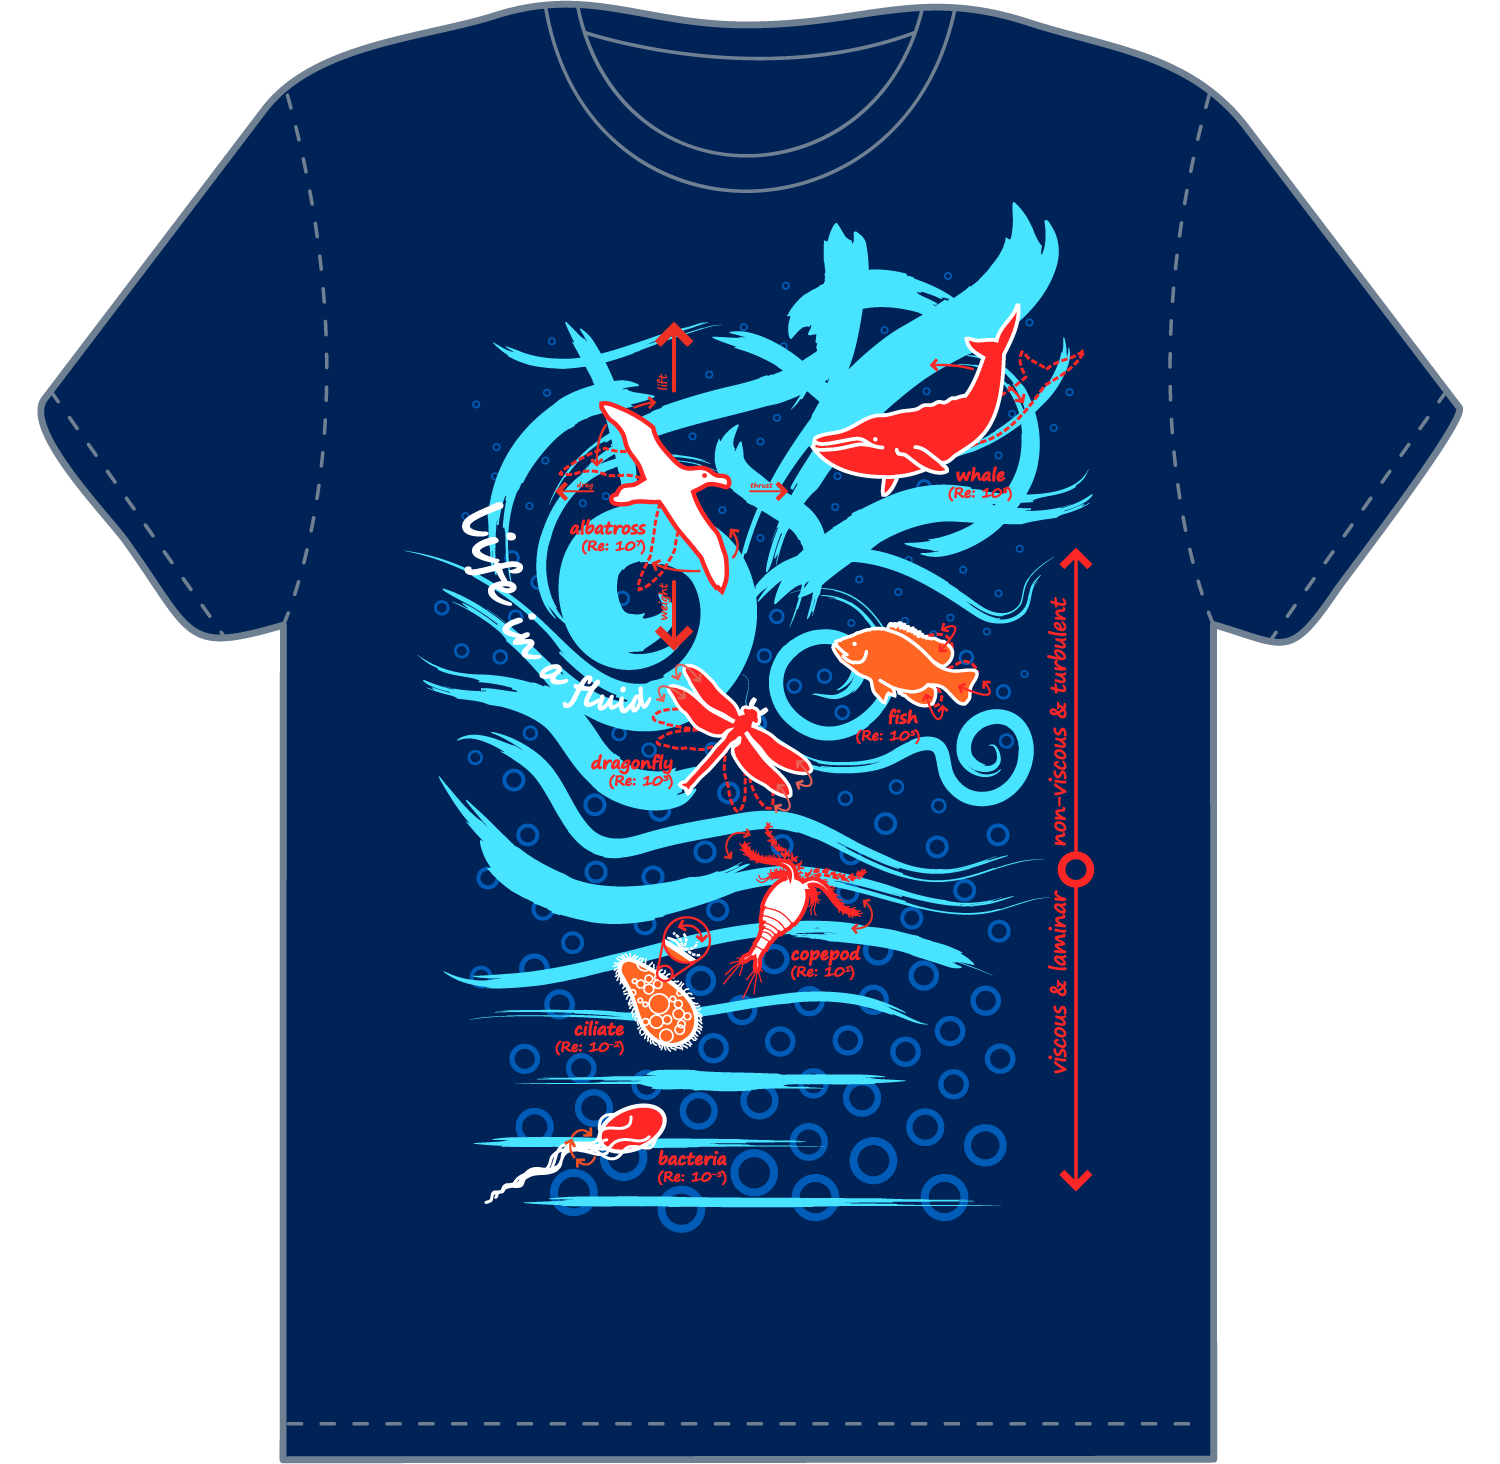 T-shirt comparing animal locomotion methods against the Reynolds number, for Iridescent